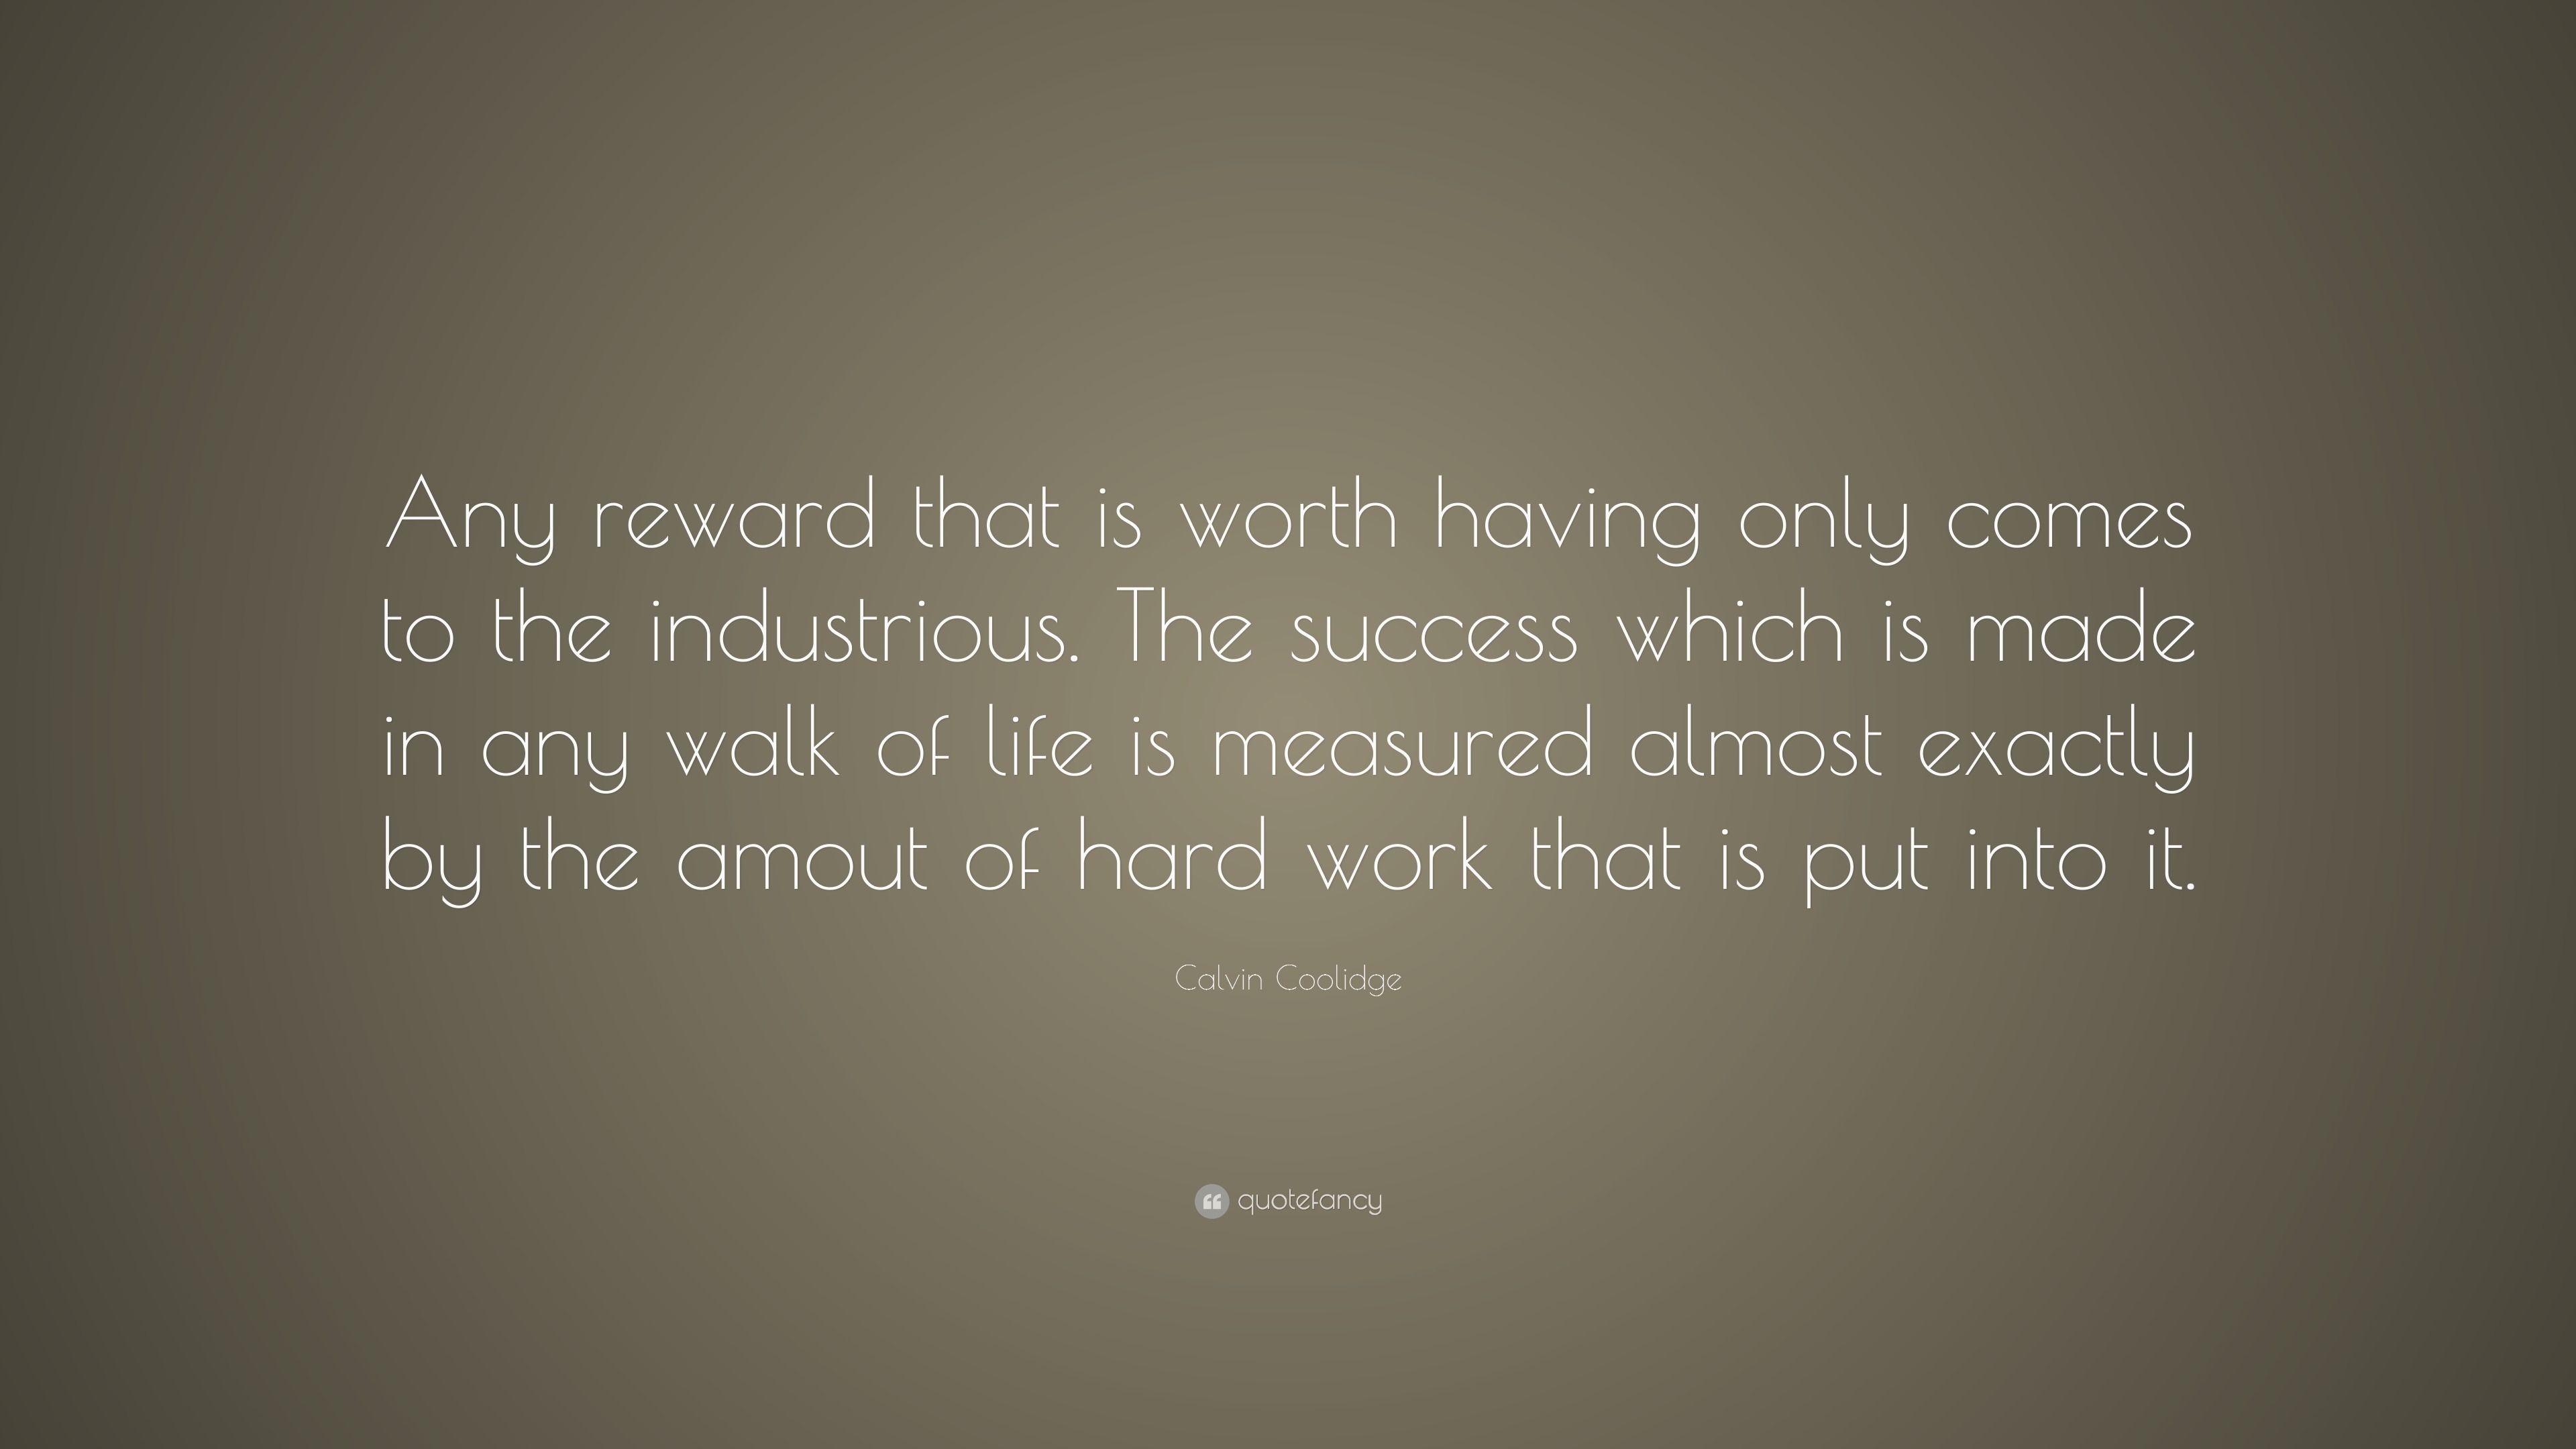 Calvin Coolidge Quote: “Any reward that is worth having only comes to ...